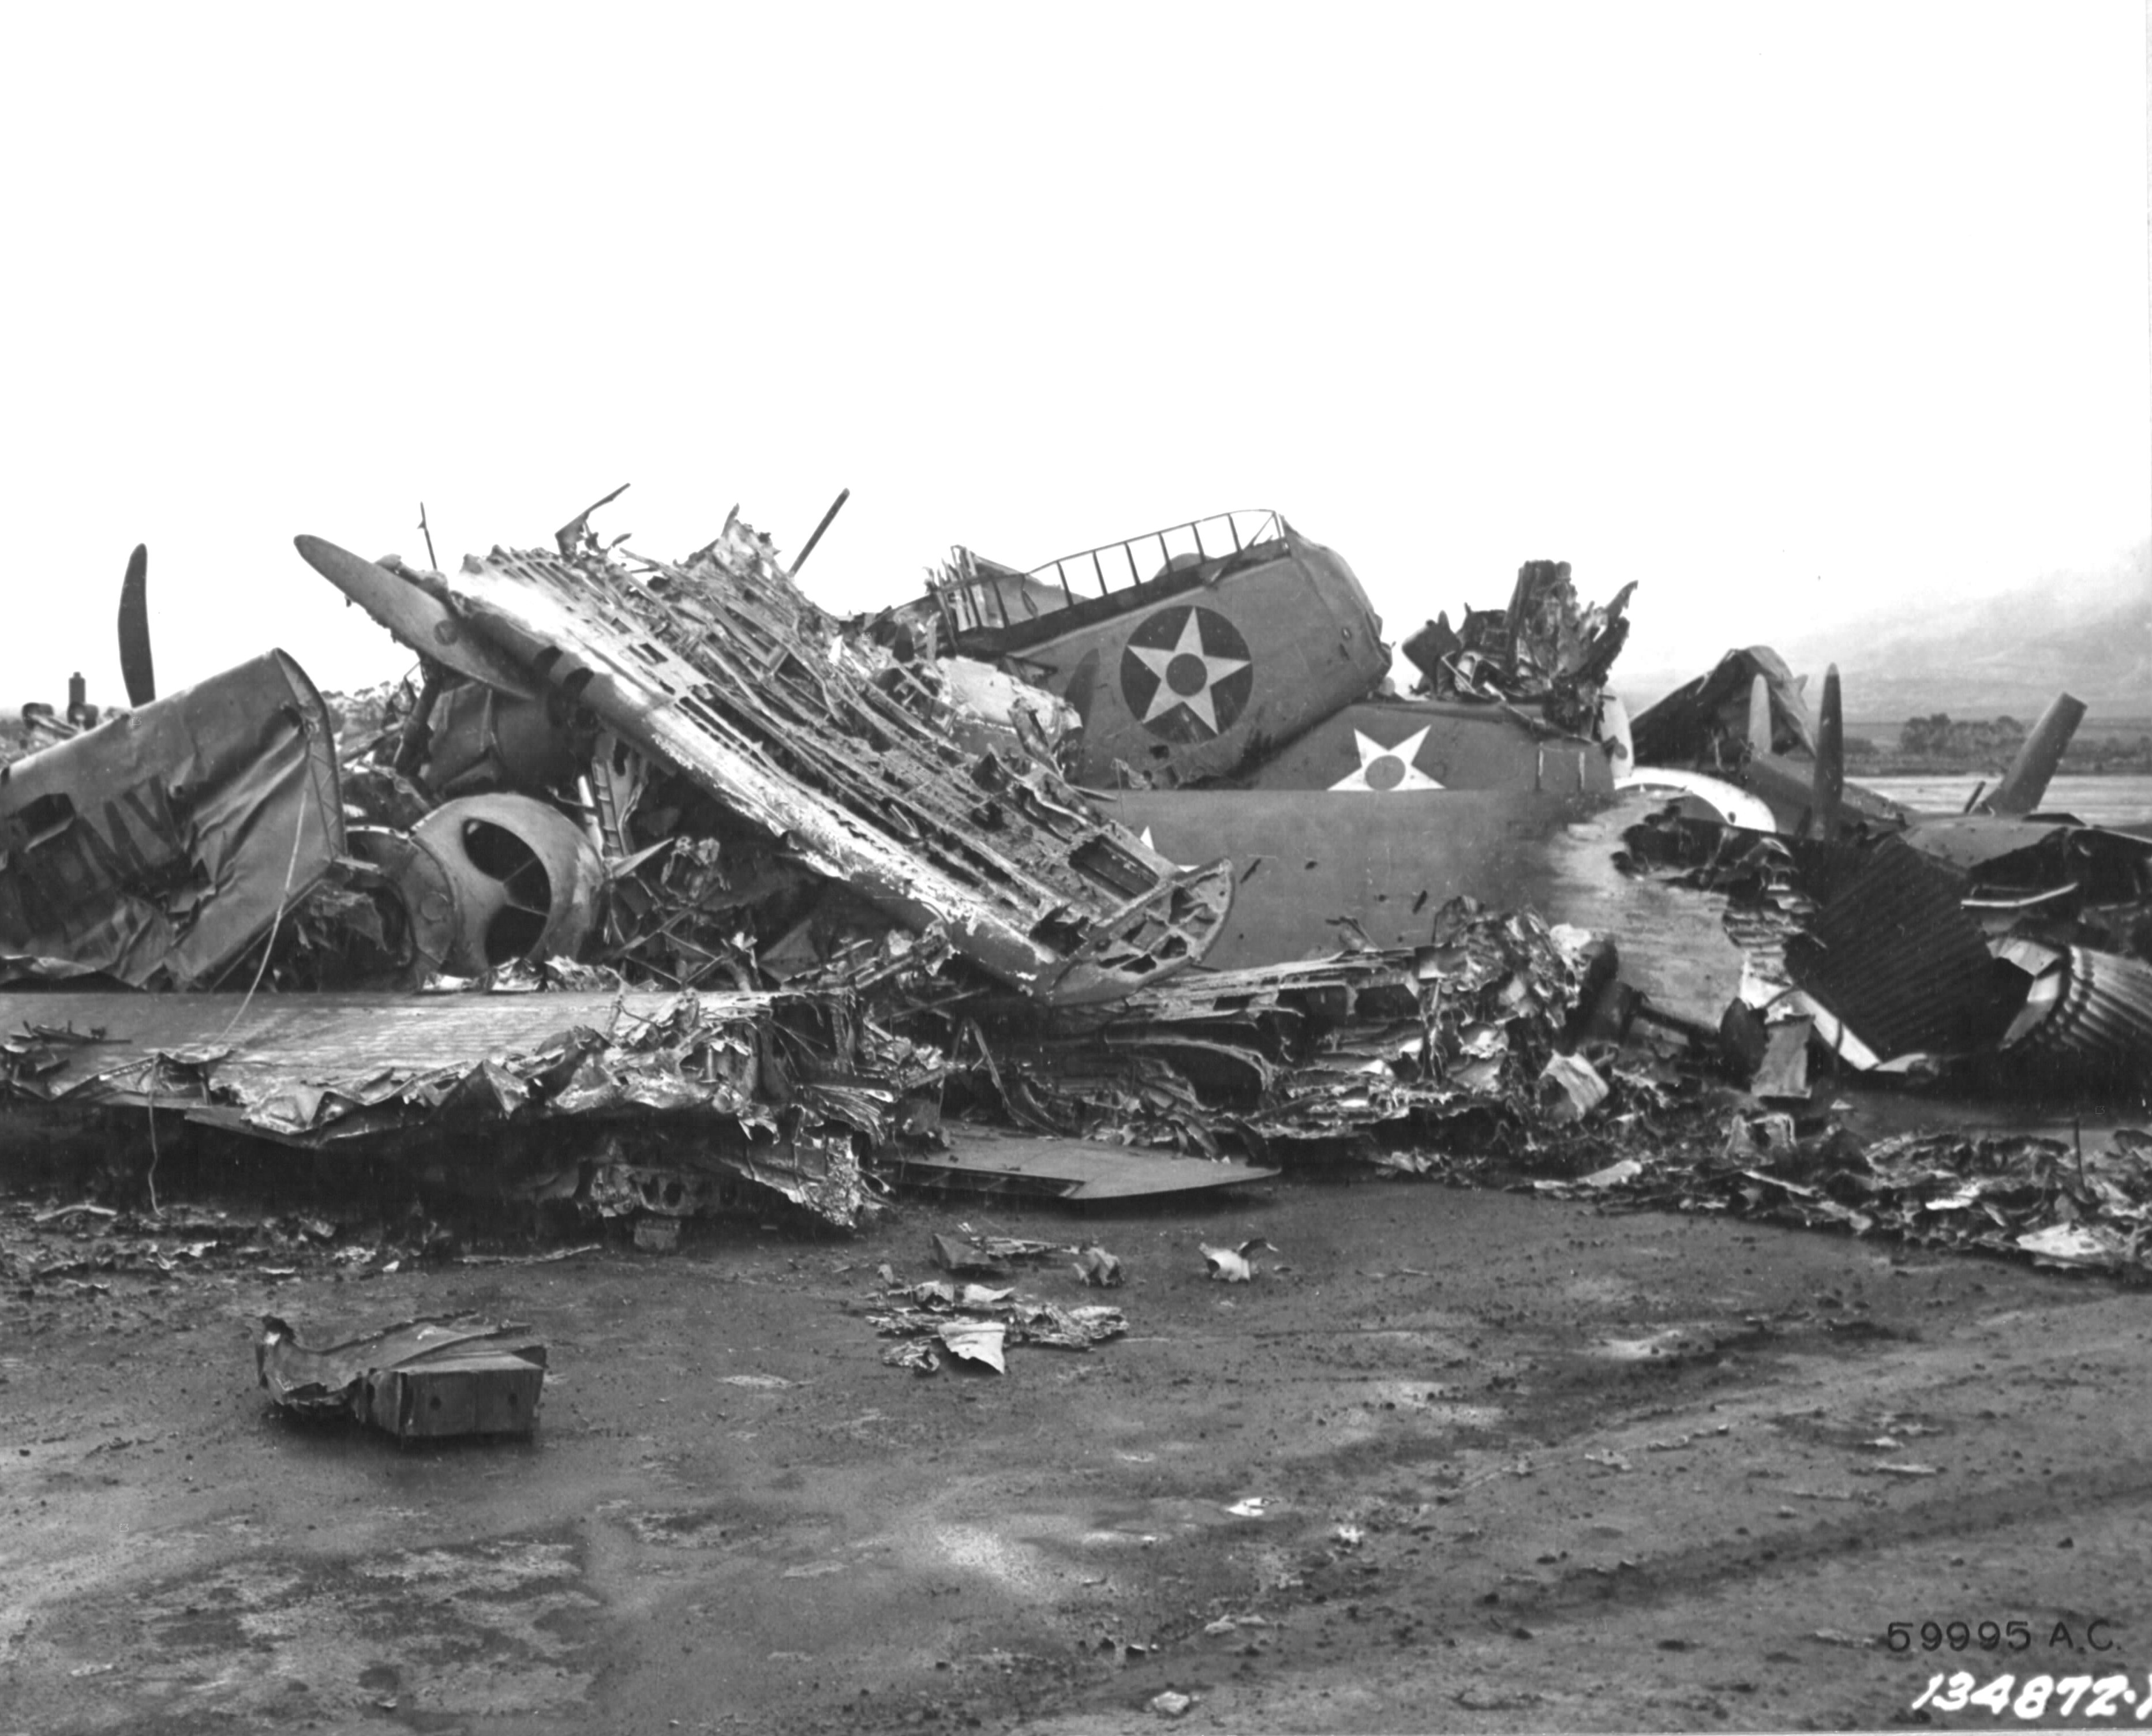 Destroyed US Army aircraft at Wheeler Field, Oahu, during post-Pearl Harbor raid clean up, Dec 1941; note P-40 parts in the pile